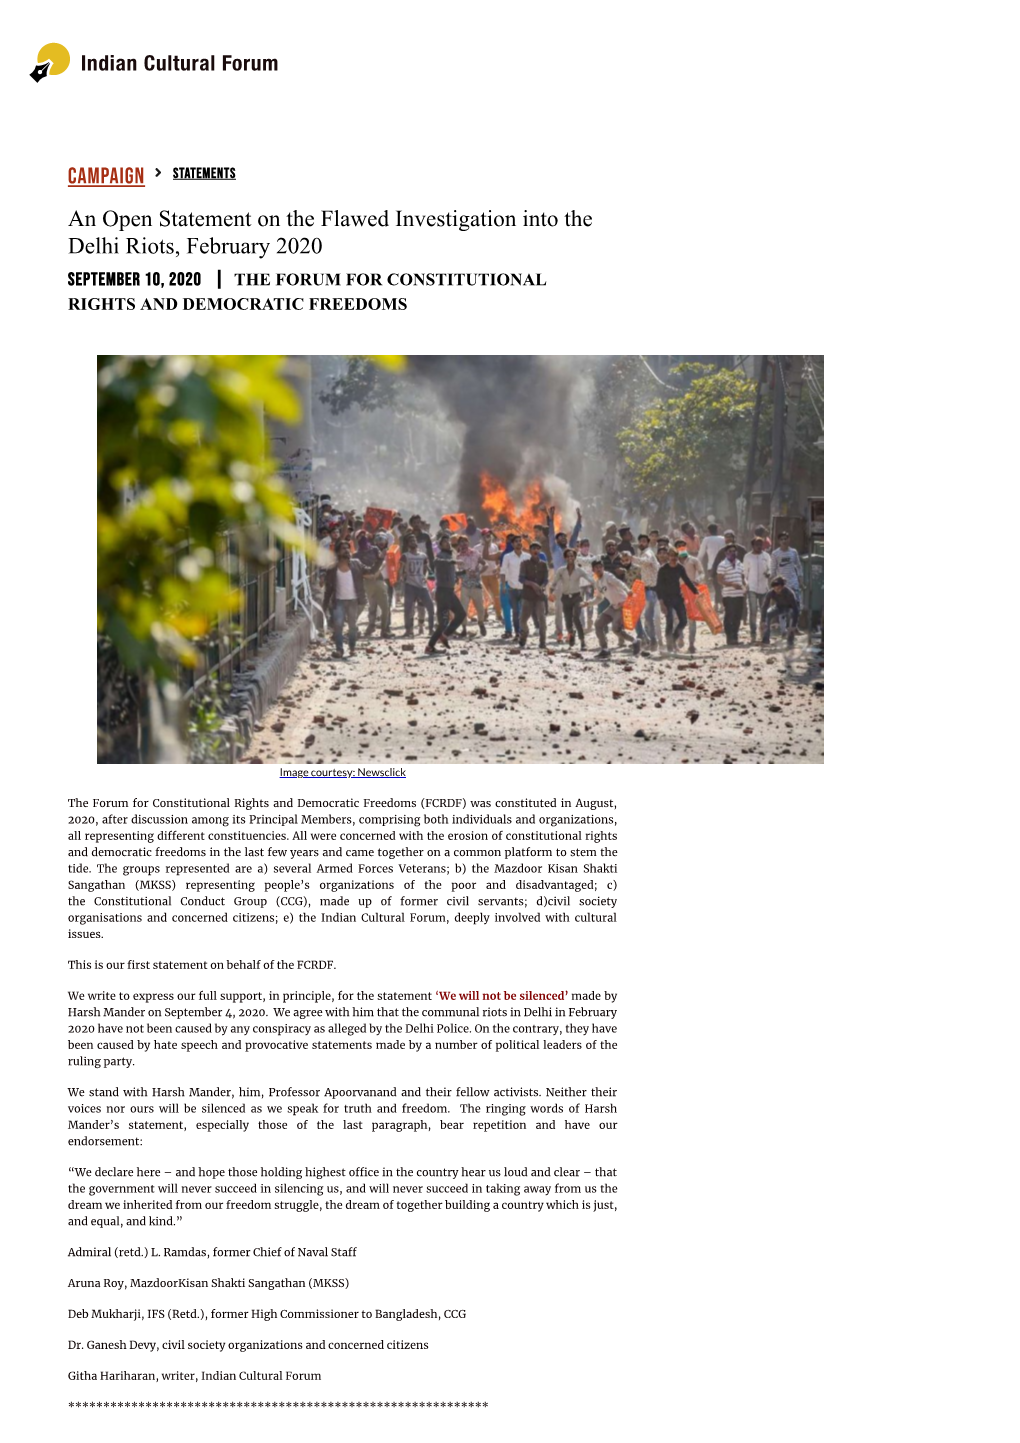 An Open Statement on the Flawed Investigation Into the Delhi Riots, February 2020